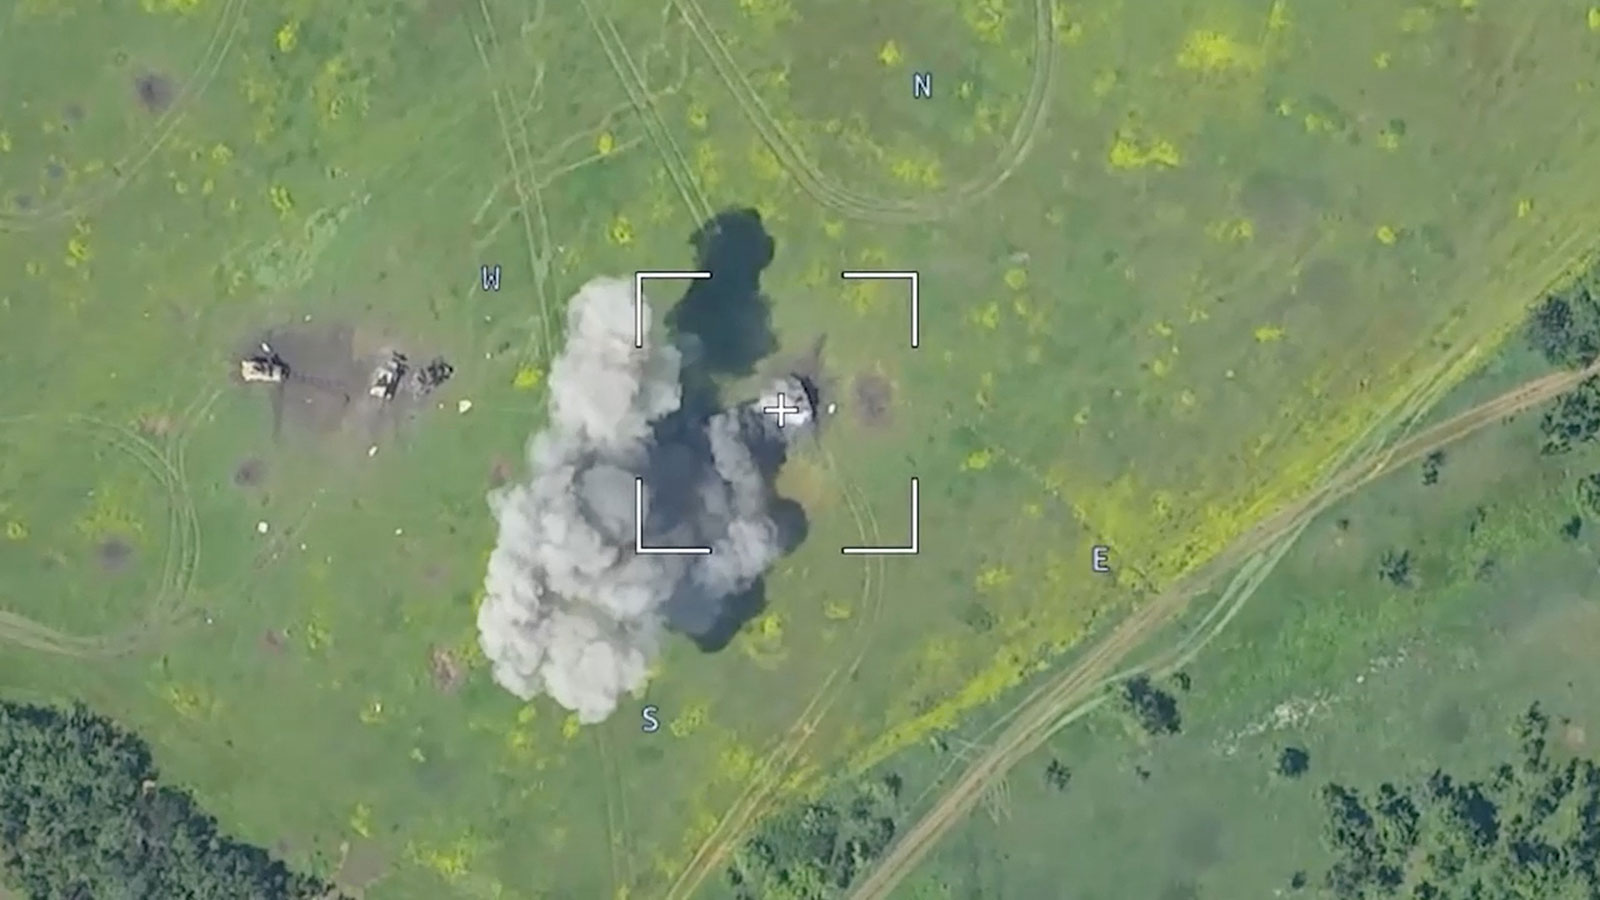 Drone footage, released June 5 by the Russian Defense Ministry shows a burning armored vehicle in an unidentified location.